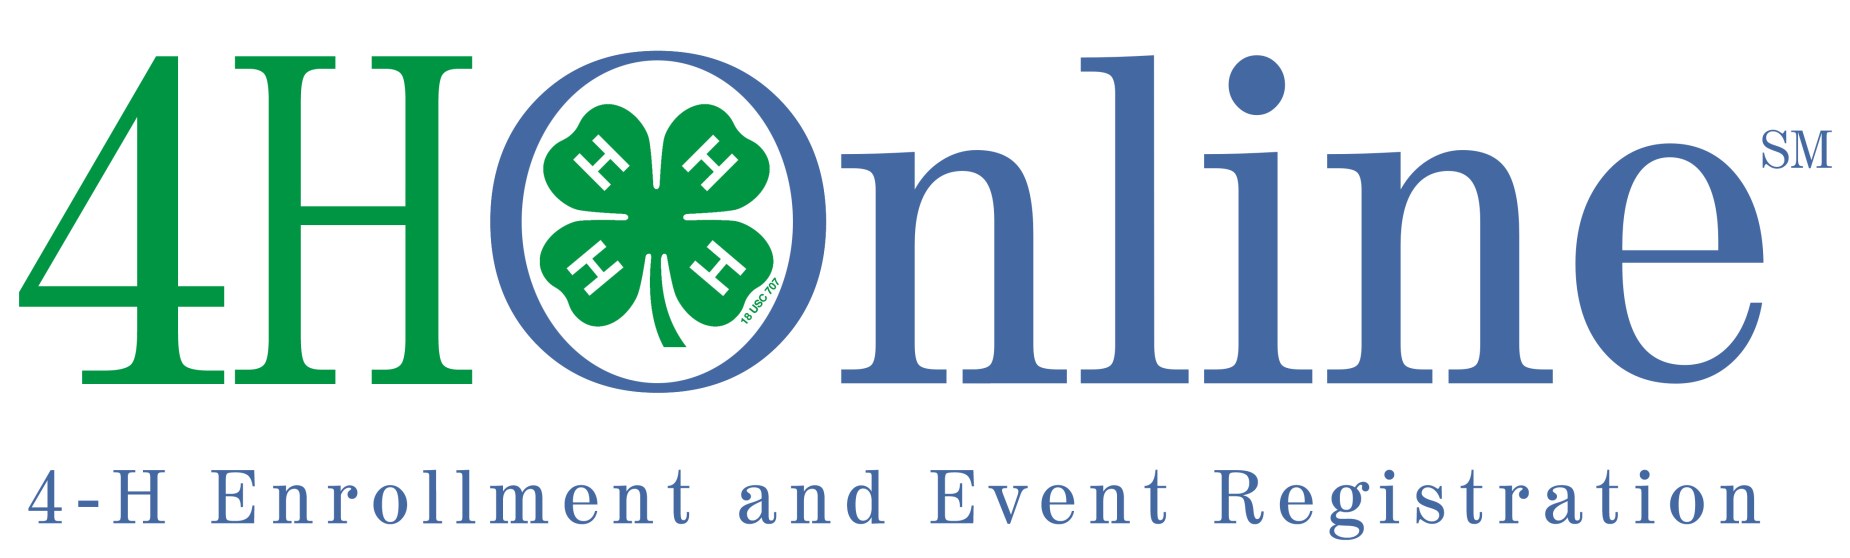 4HOnline Enrollment Instructions Page 2: Creating a Family Profile Page 3: Adding a Member Profile and Personal Information Pages 4-5: Additional Information, Health Form, Clubs and Projects Page 6: